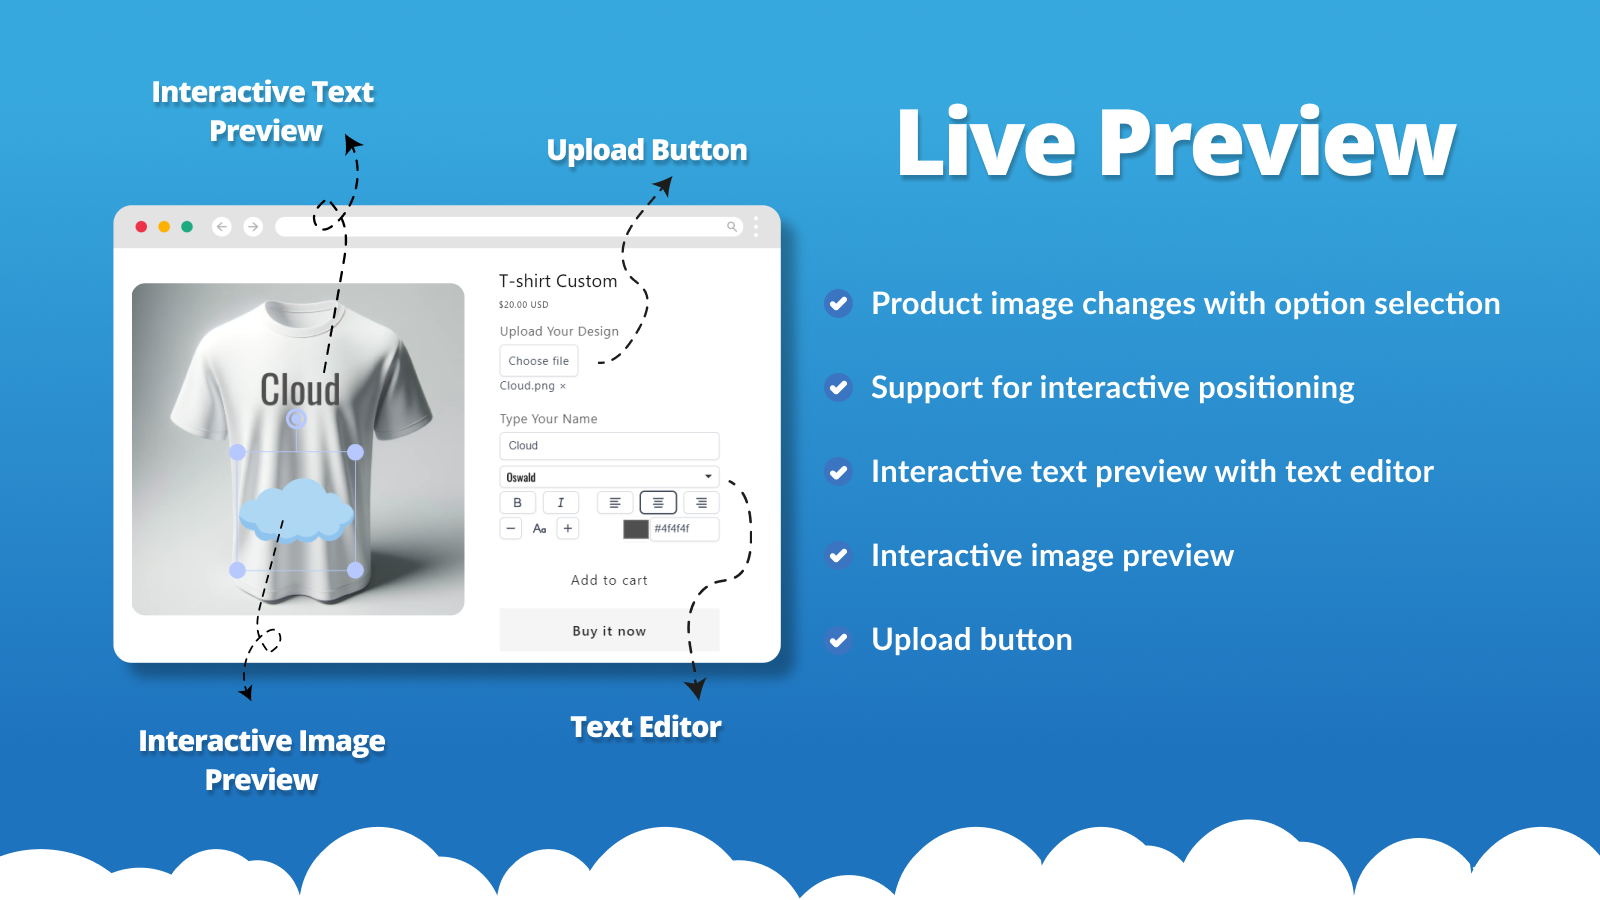 Customers can see the product image update live as they change